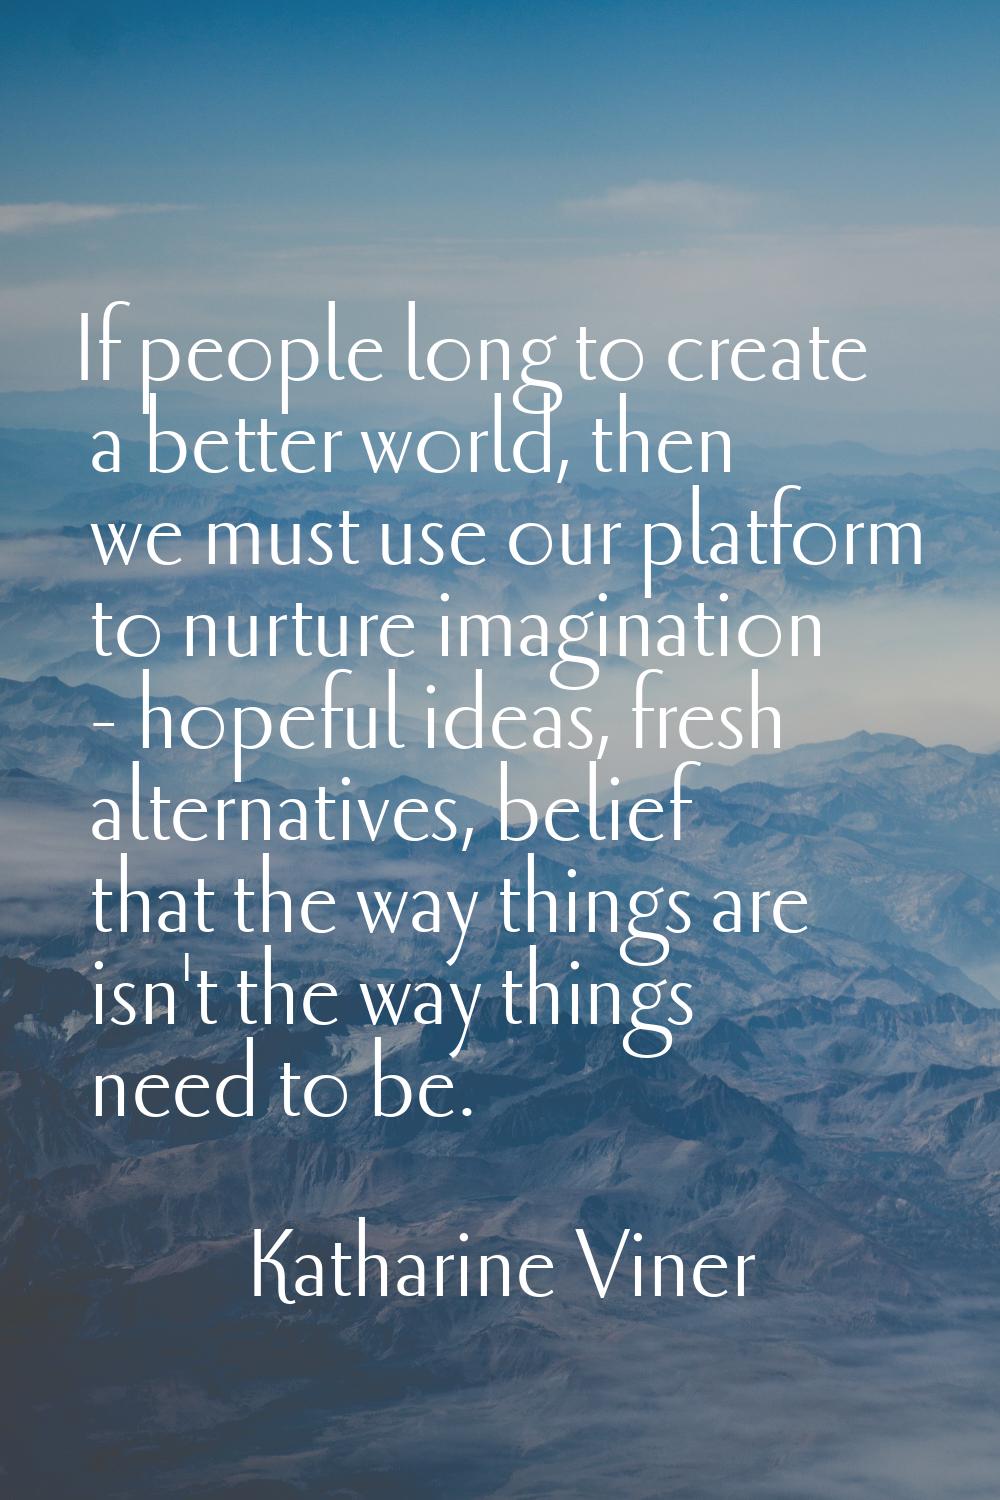 If people long to create a better world, then we must use our platform to nurture imagination - hop